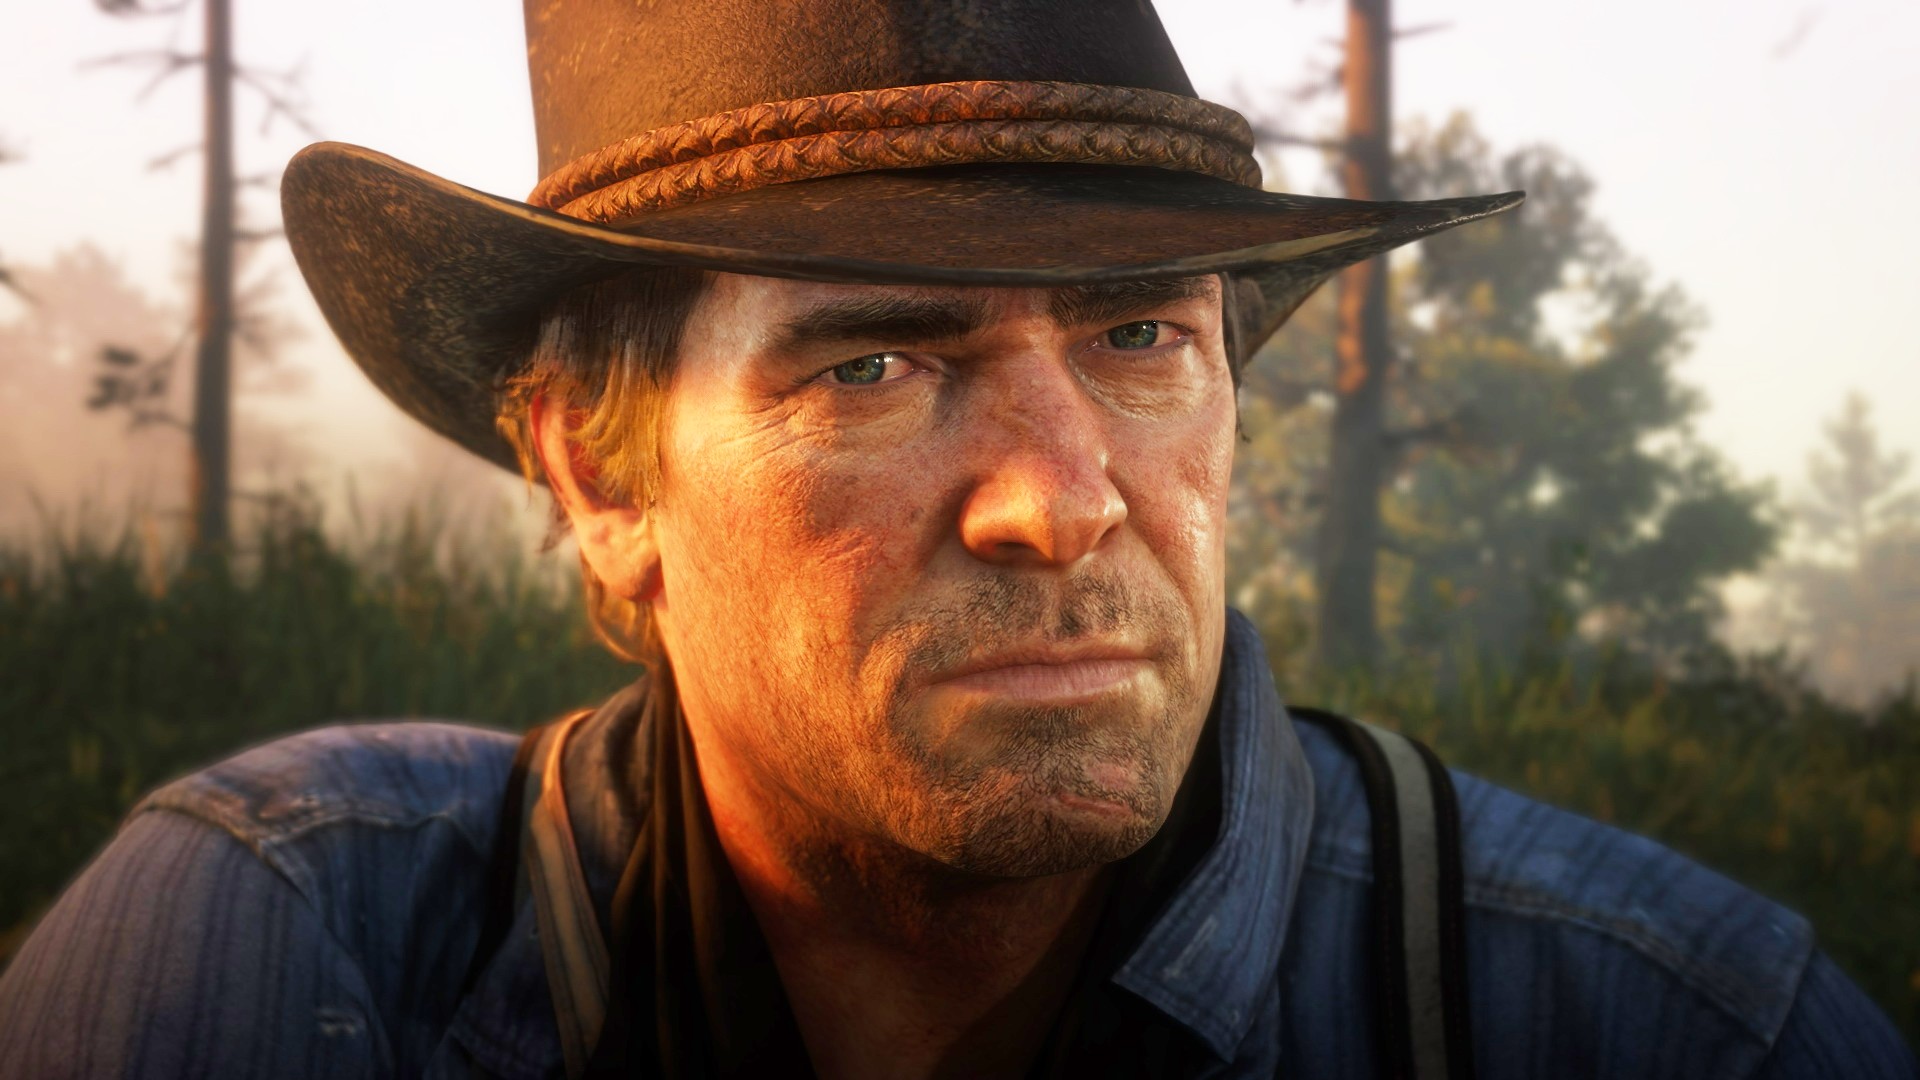 Three years after release, Red Dead Redemption 2 is still hitting new  concurrent player peaks on Steam